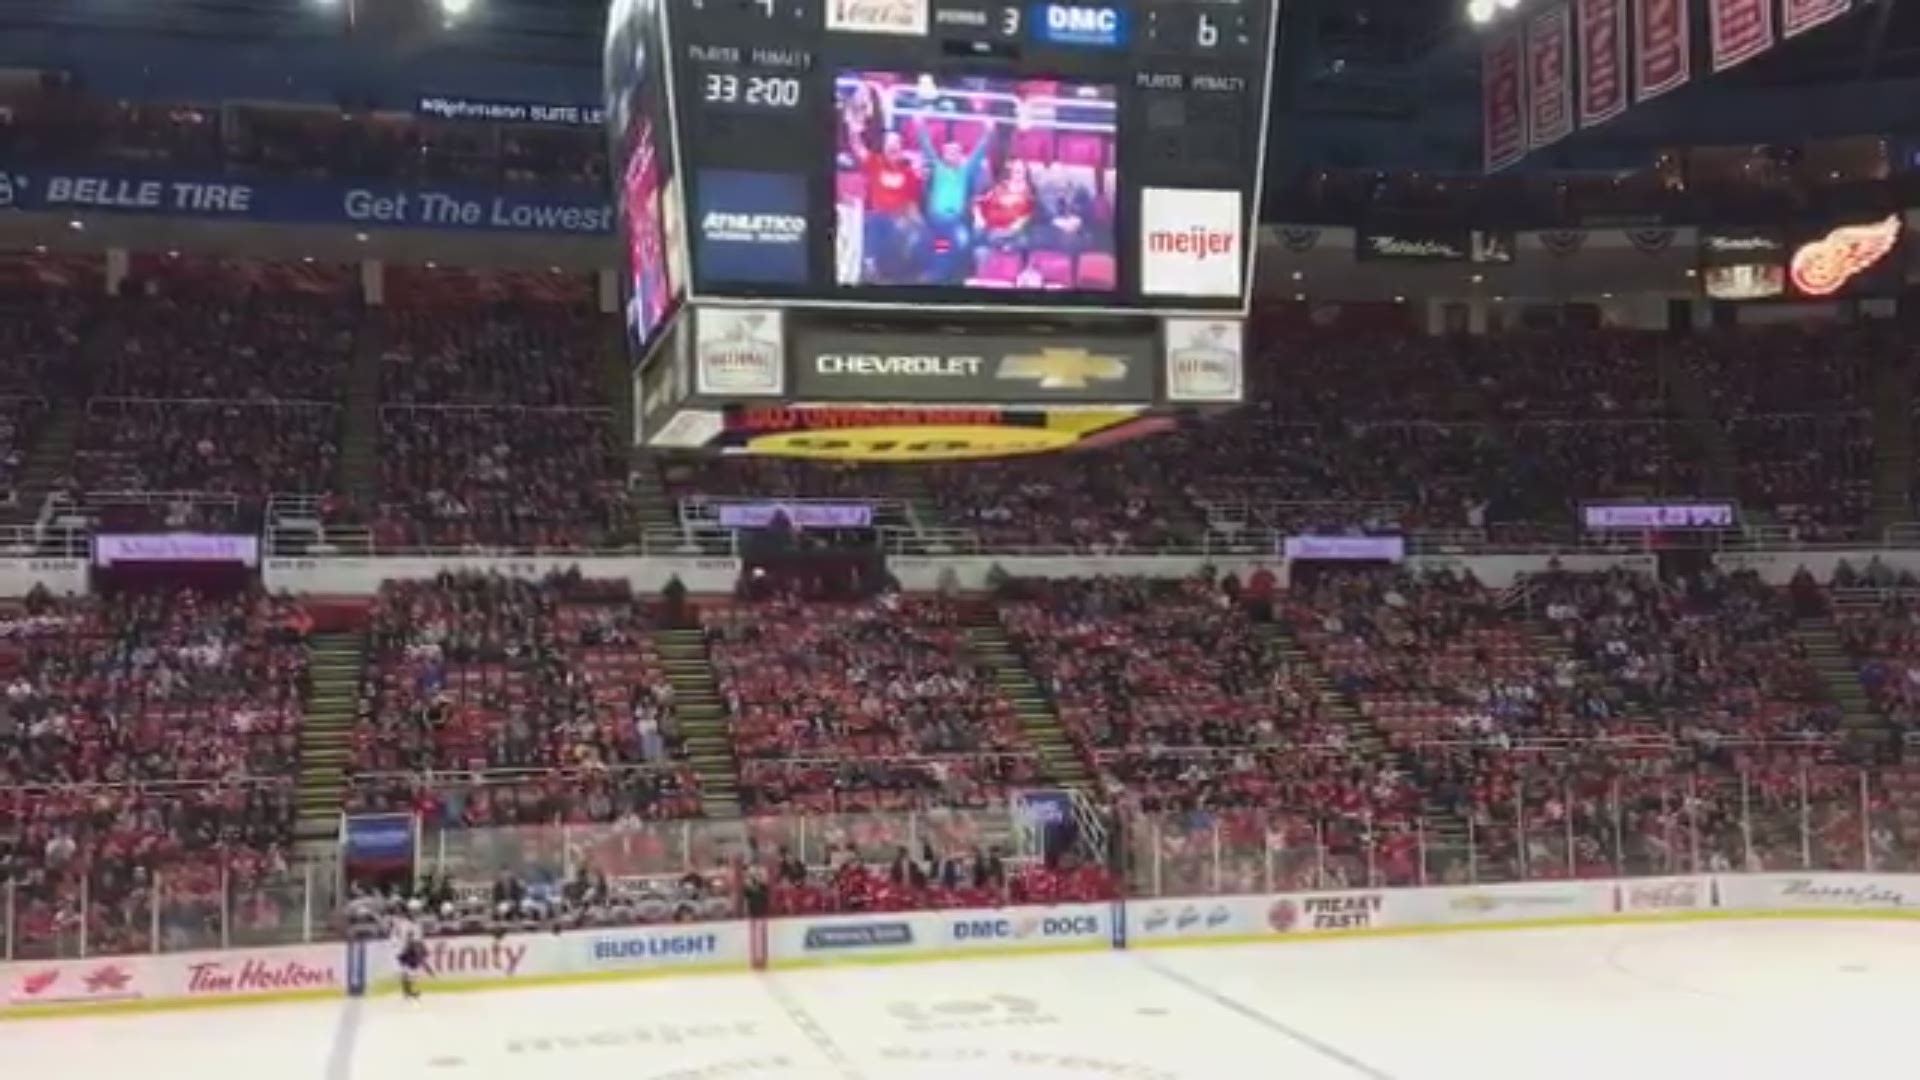 Mason Becker steals the show at Detroit Red Wings game